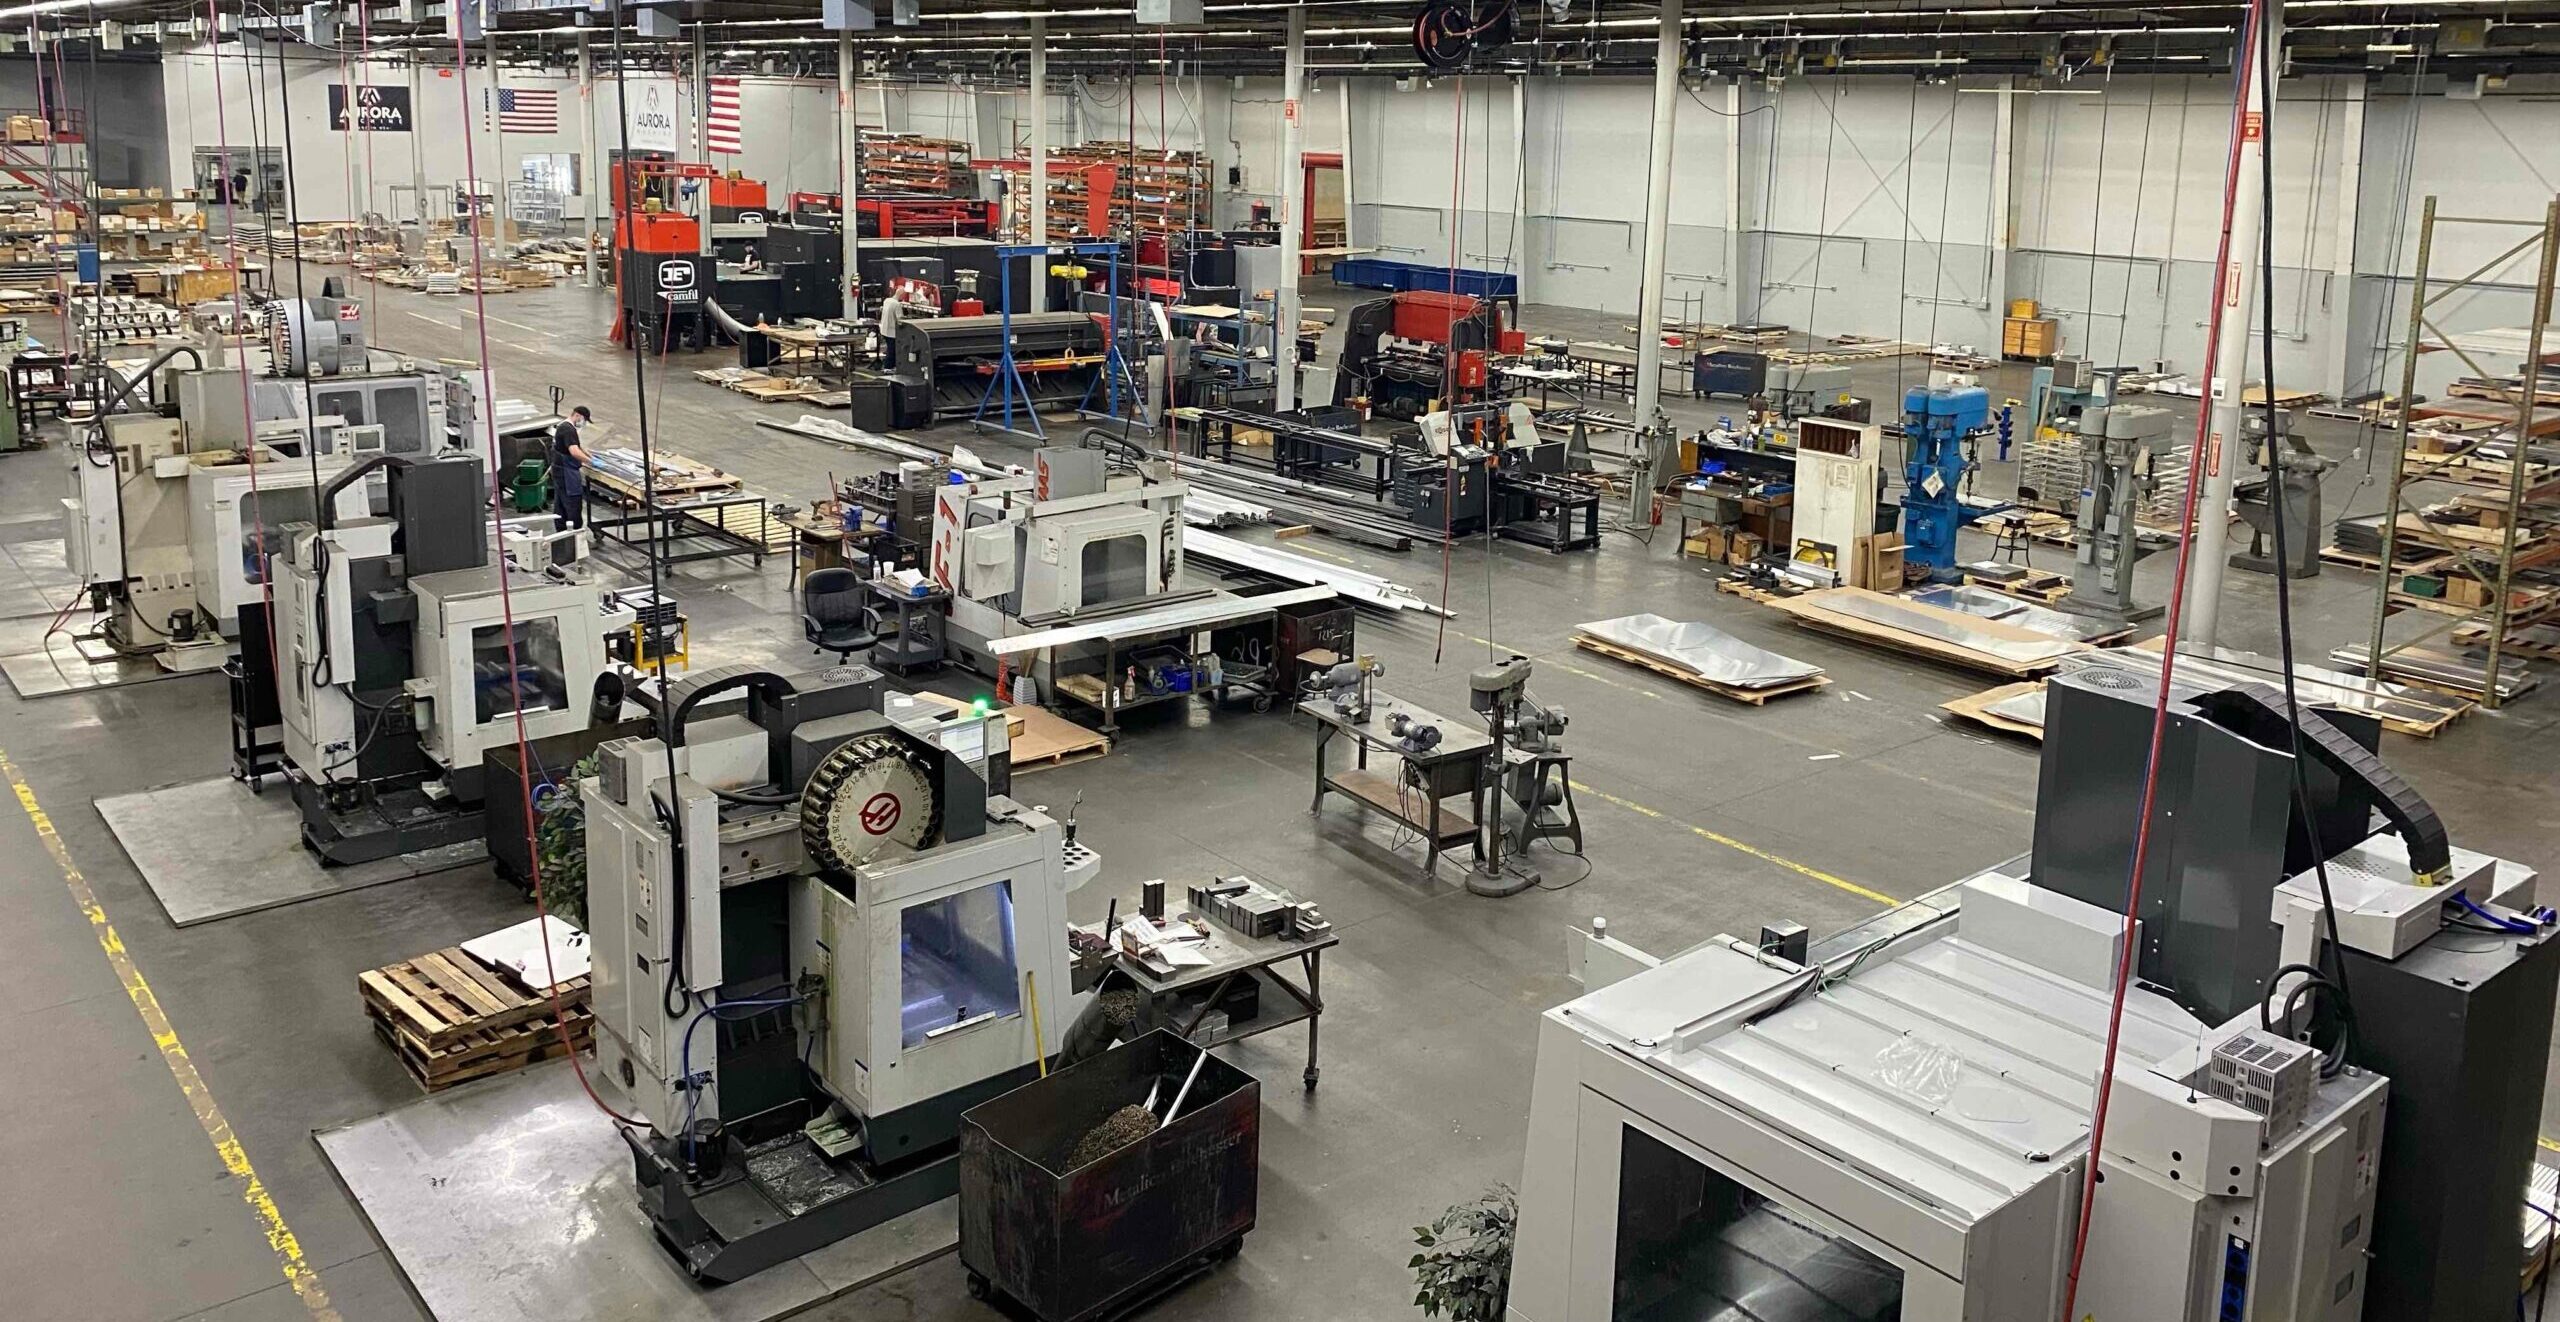 5 Common Mistakes to Avoid in Machine Shop Quoting